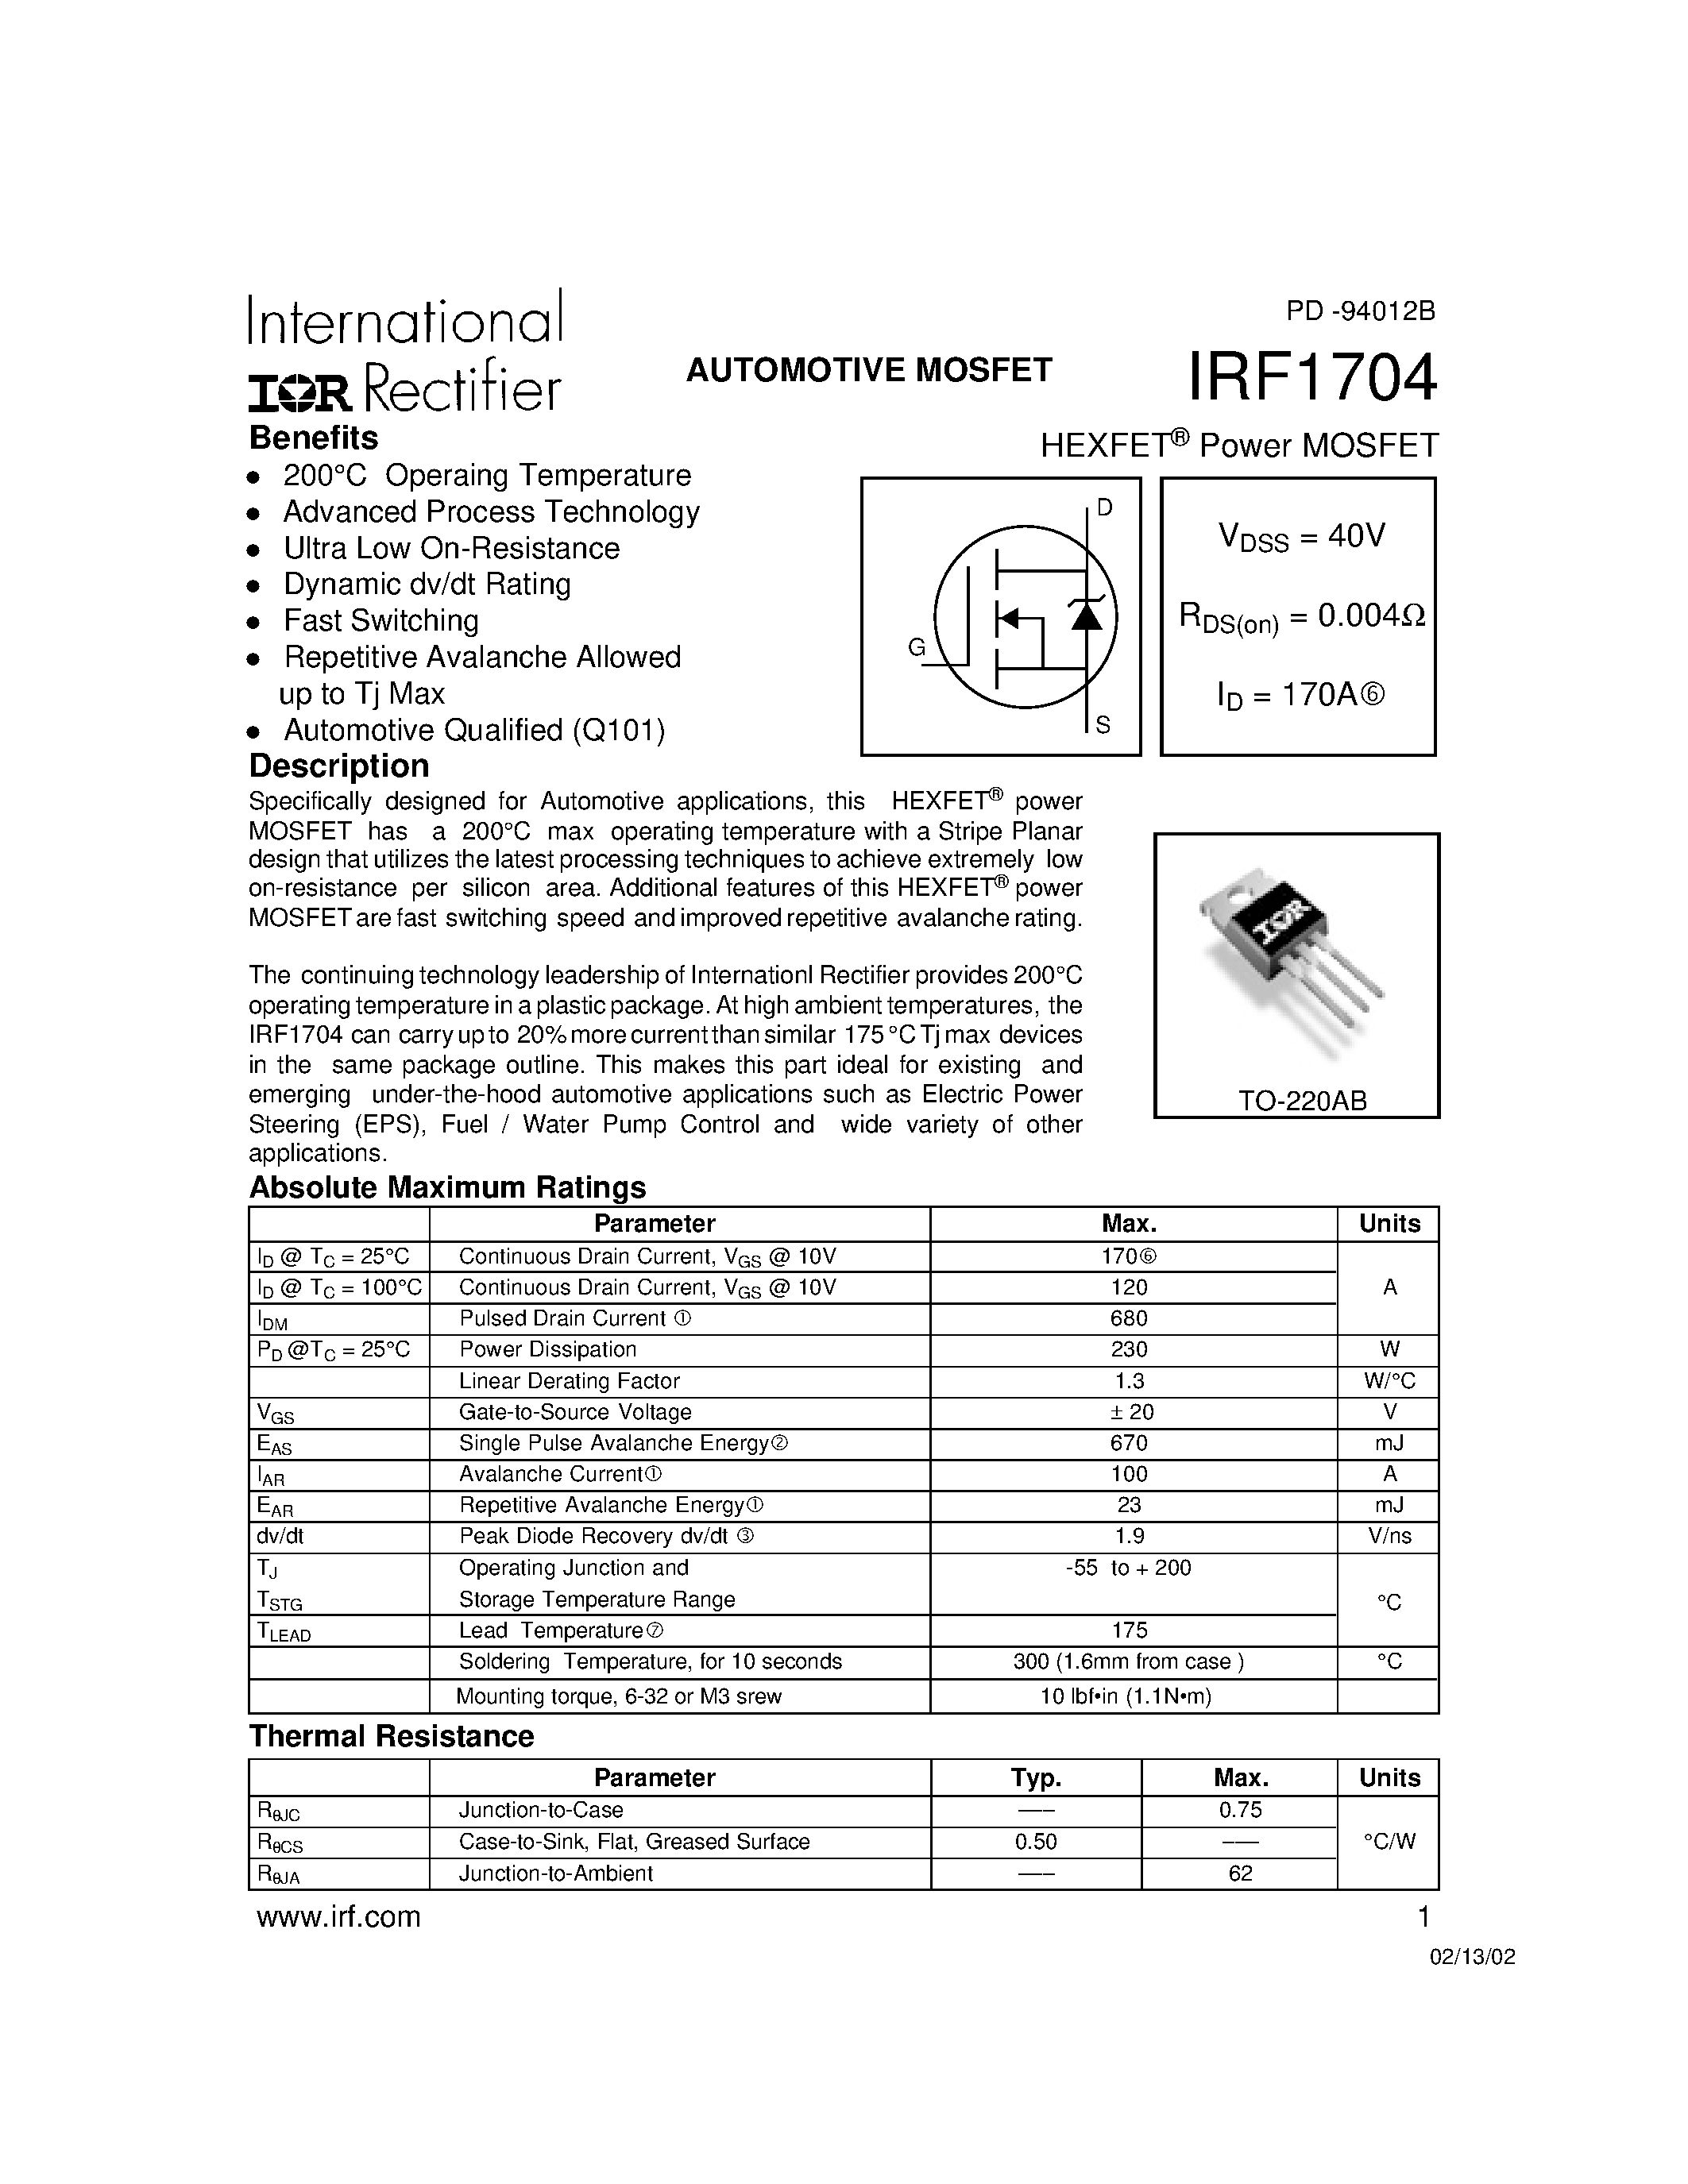 Даташит IRF1704 - Power MOSFET(Vdss=40V/ Rds(on)=0.004ohm/ Id=170A) страница 1